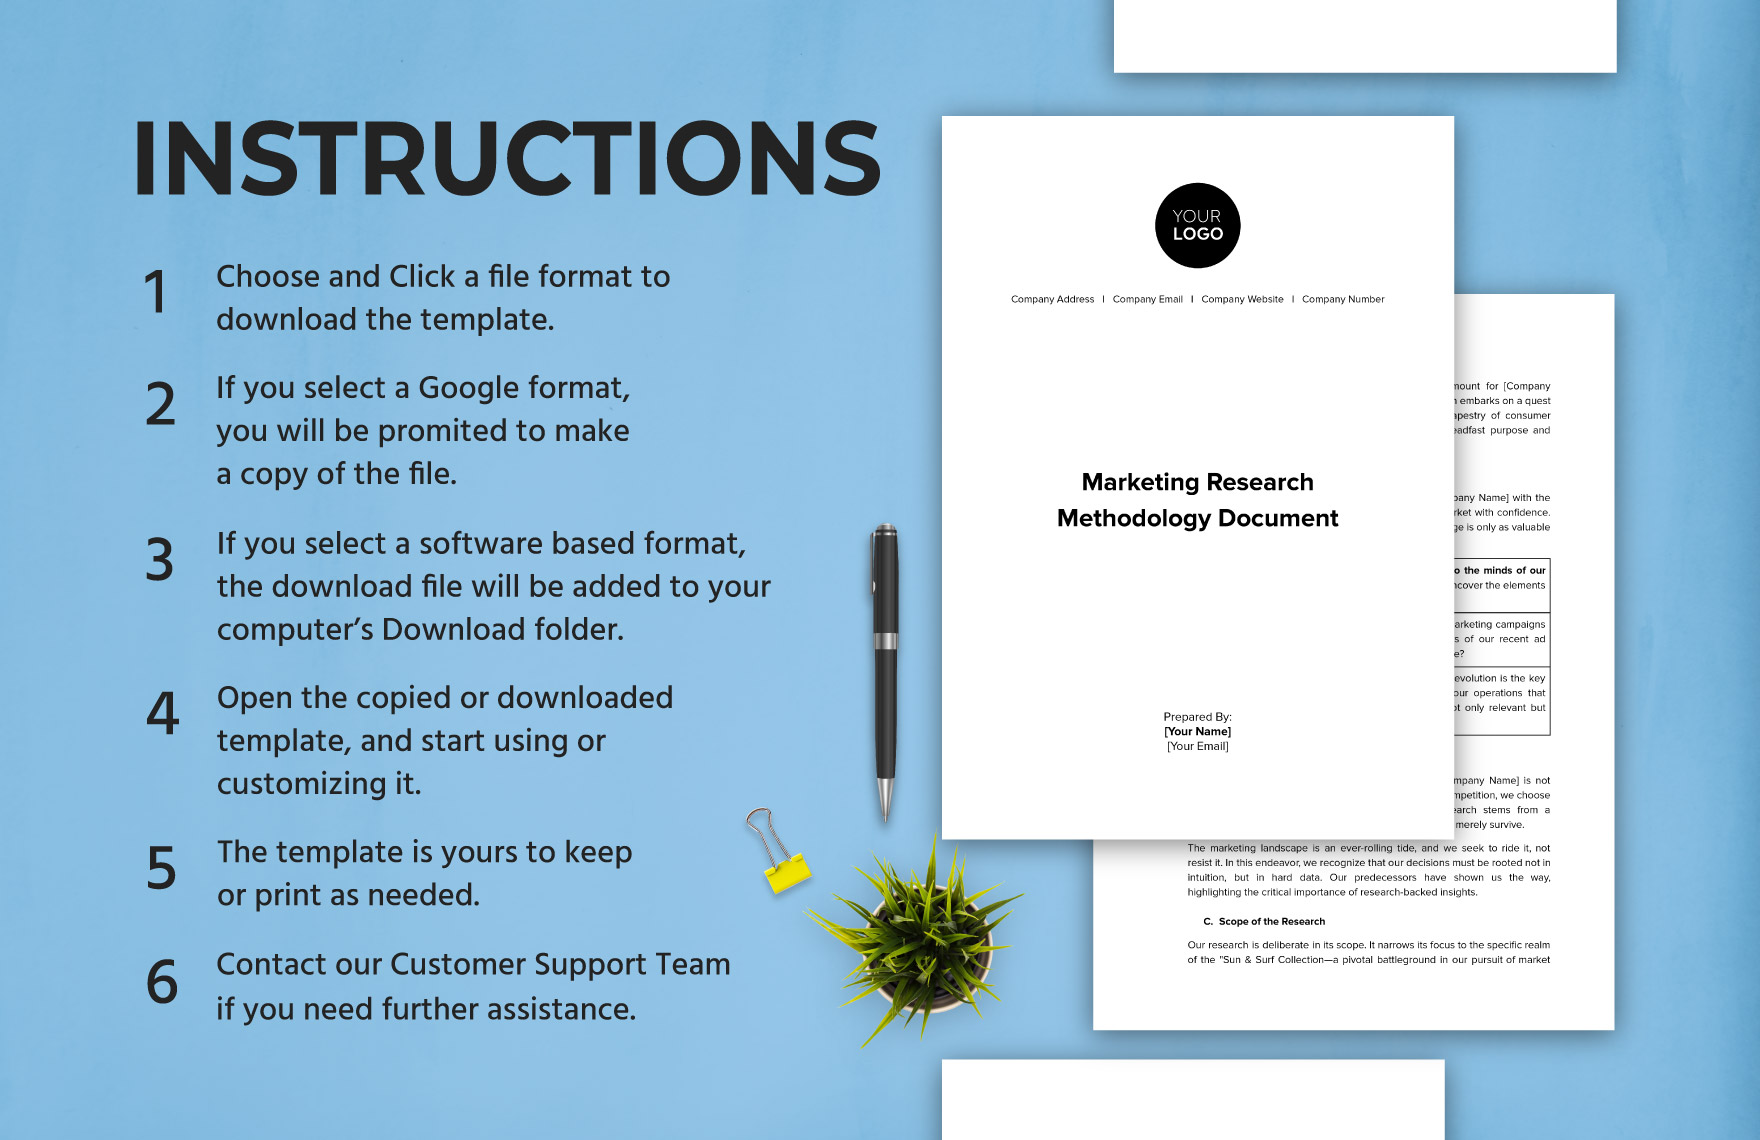 Marketing Research Methodology Document Template